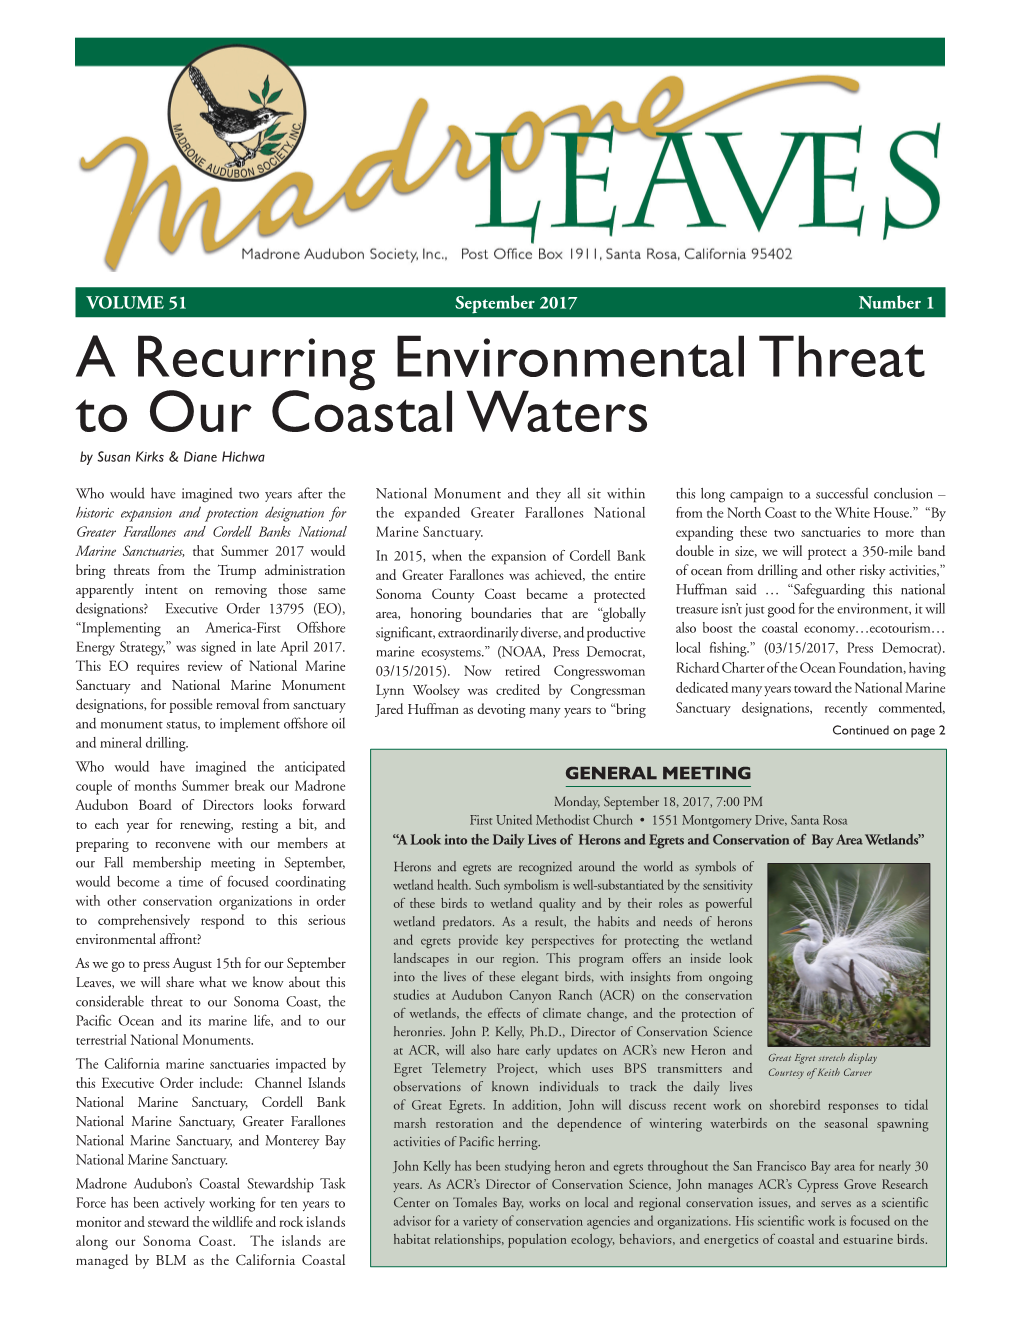 A Recurring Environmental Threat to Our Coastal Waters by Susan Kirks & Diane Hichwa